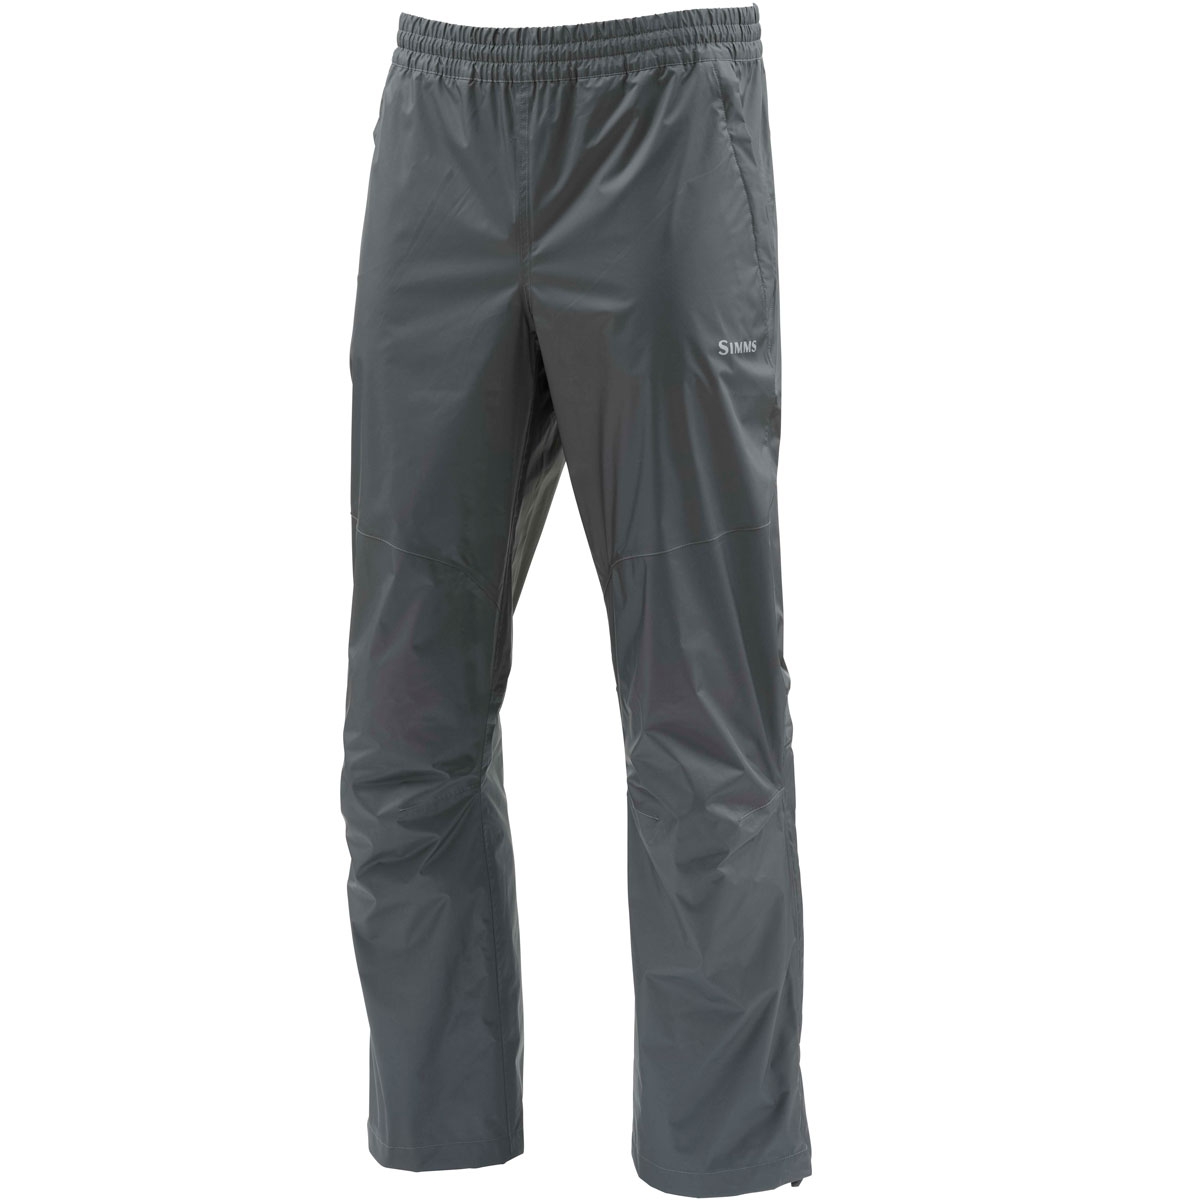 Simms Waypoints Pants Trousers - Waterproof Breathable Fishing Clothing